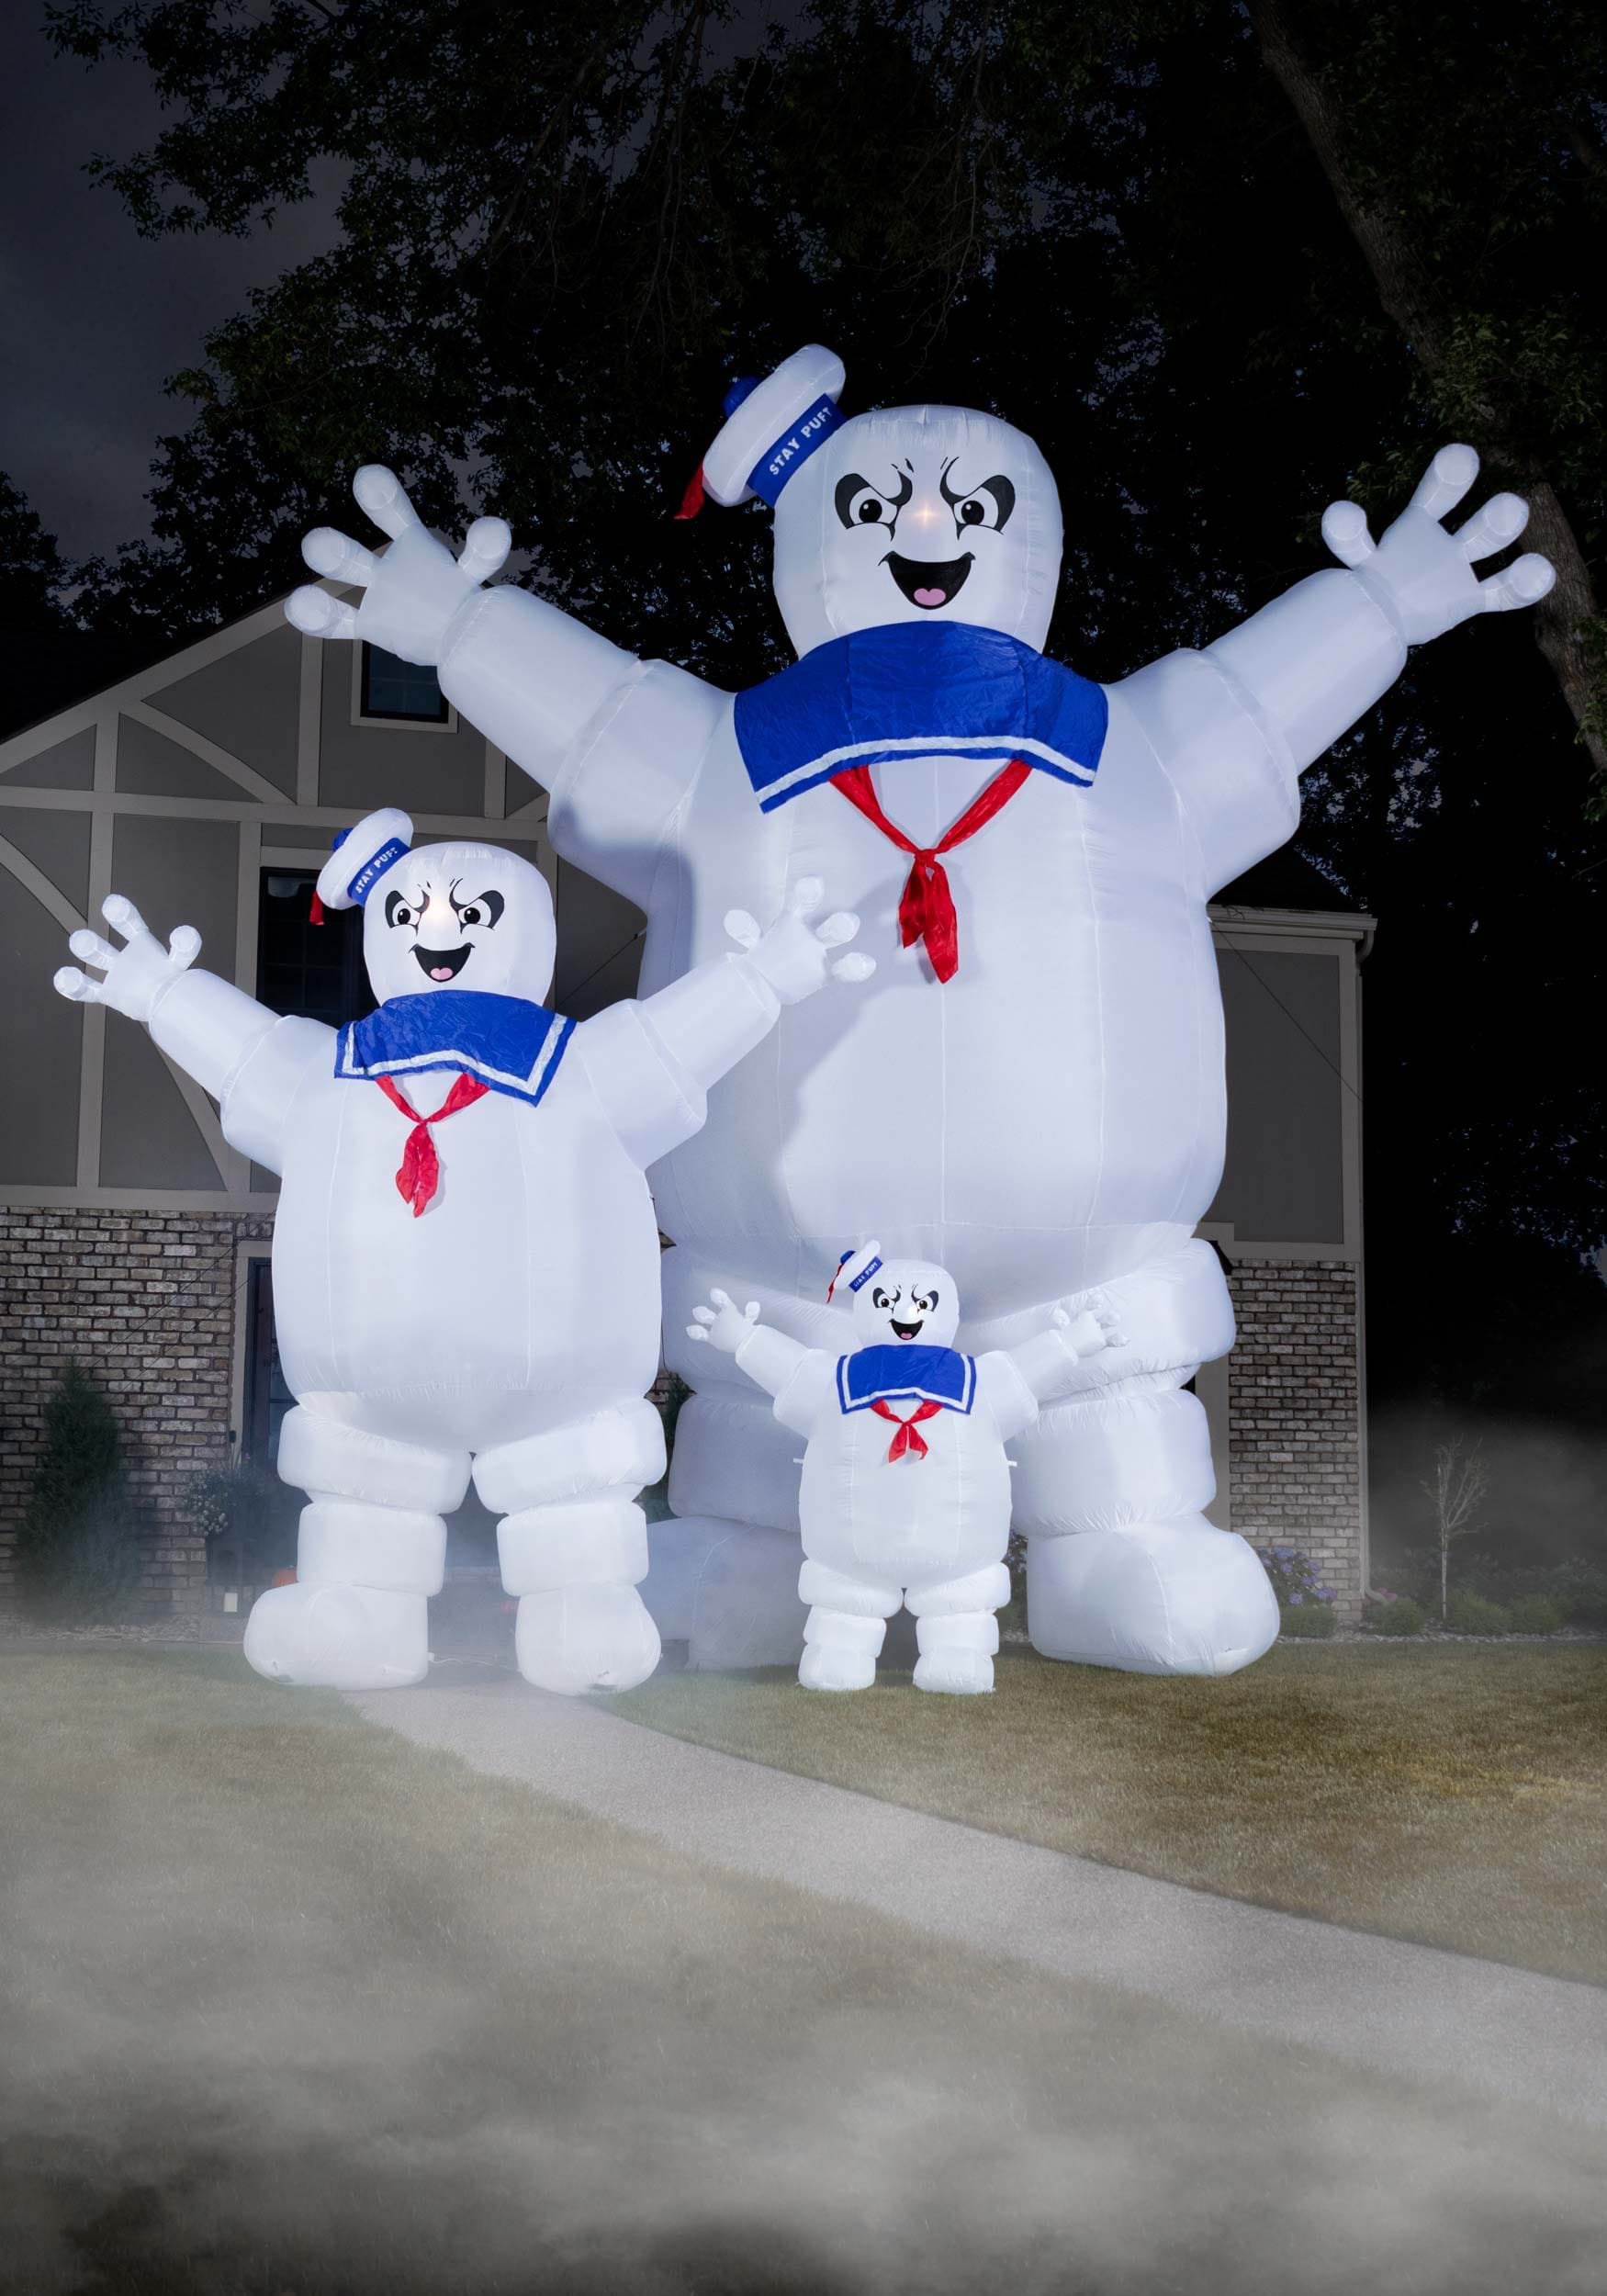 Ghostbusters Deluxe Stay Puft Kid's Costume